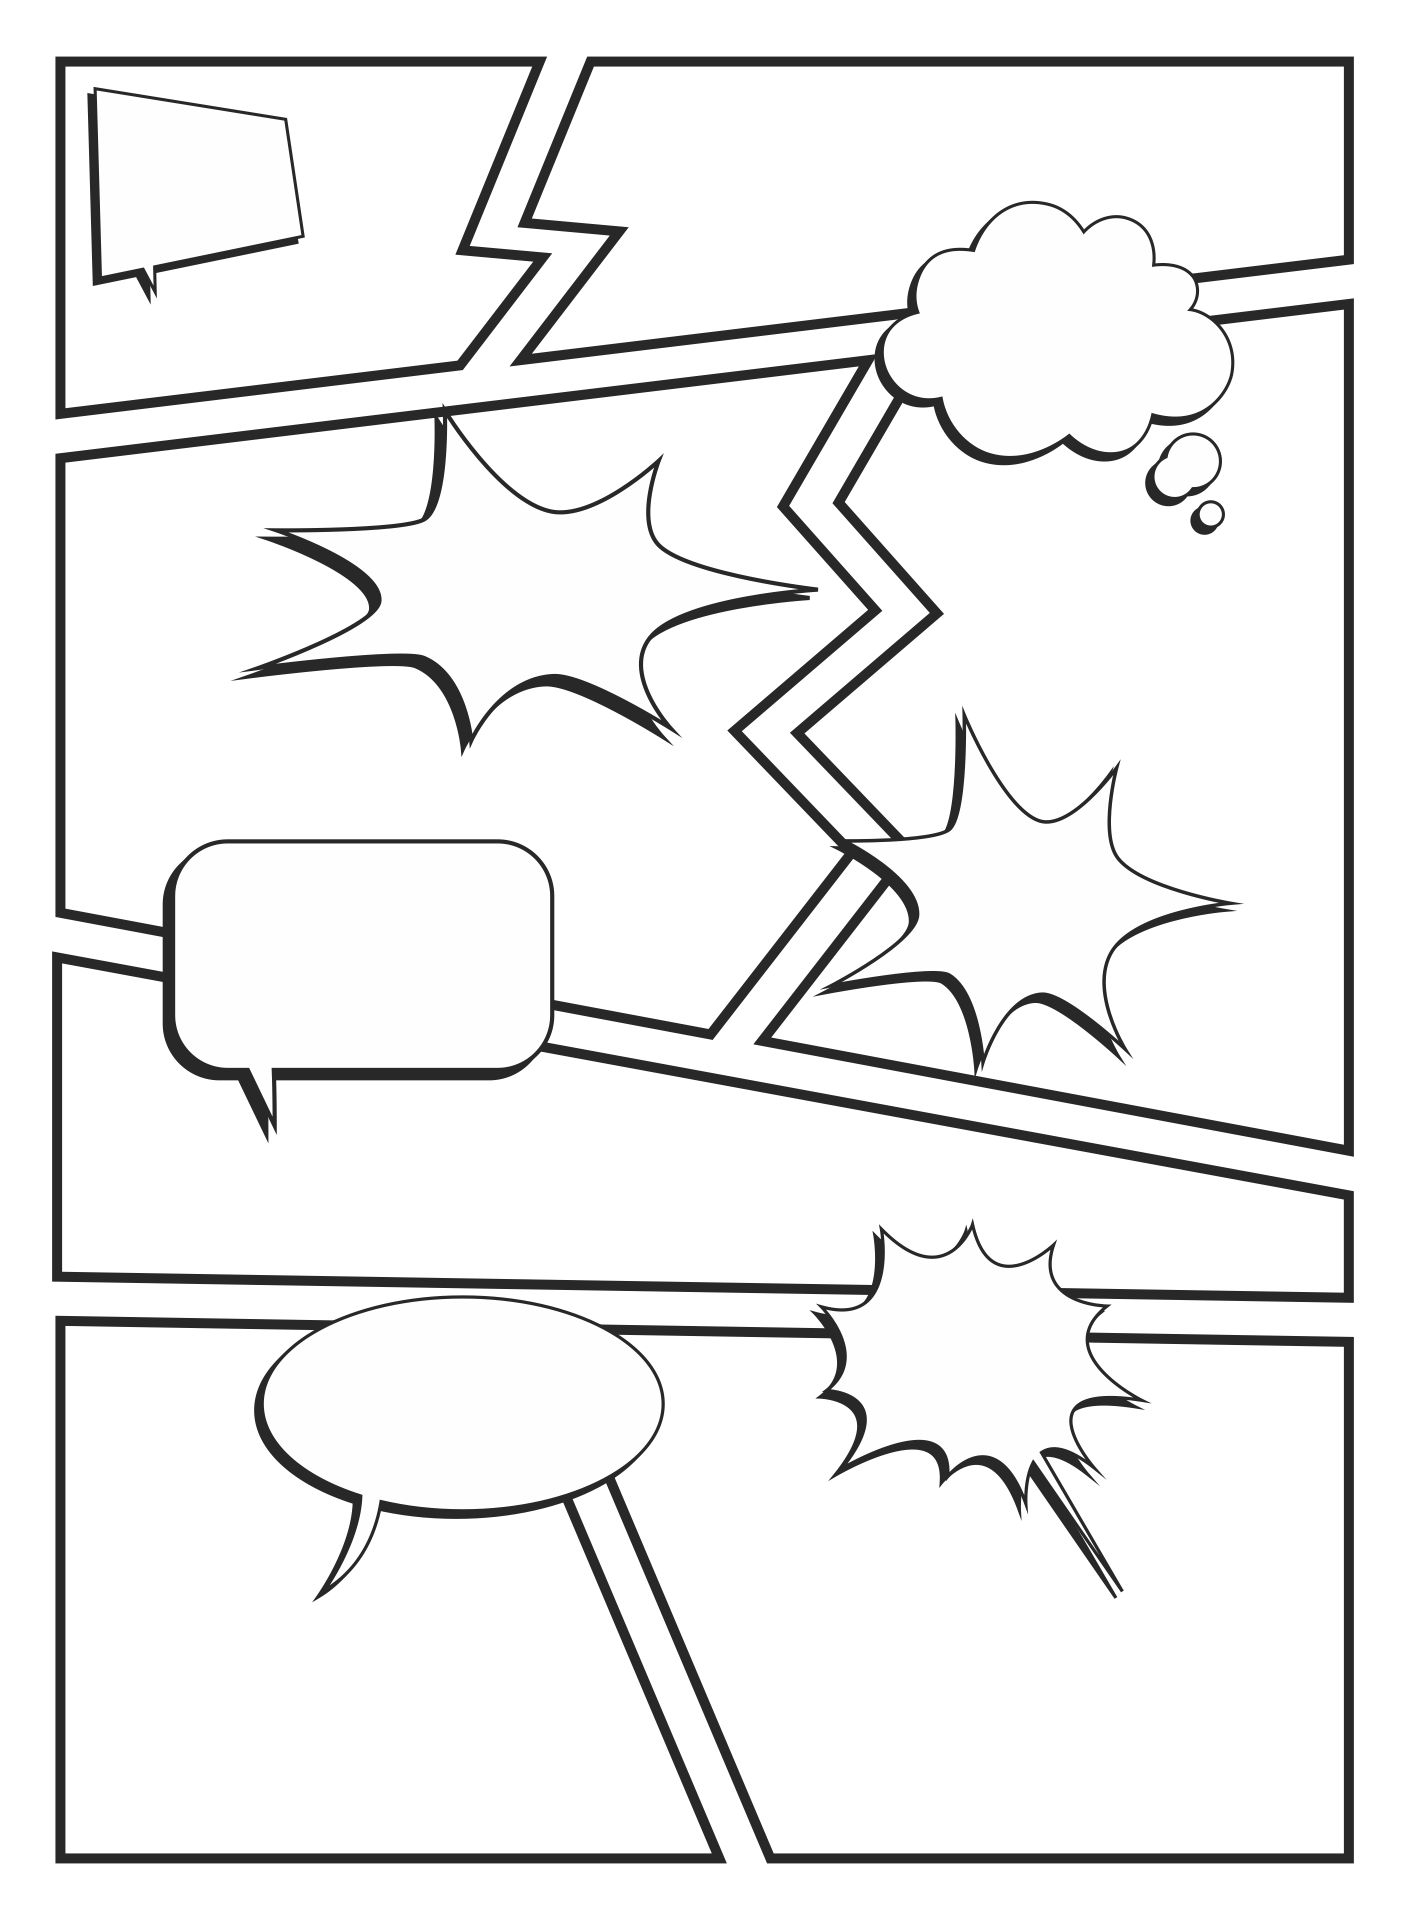 7 Best Images of Comic Book Templates Printable Free Printable Comic